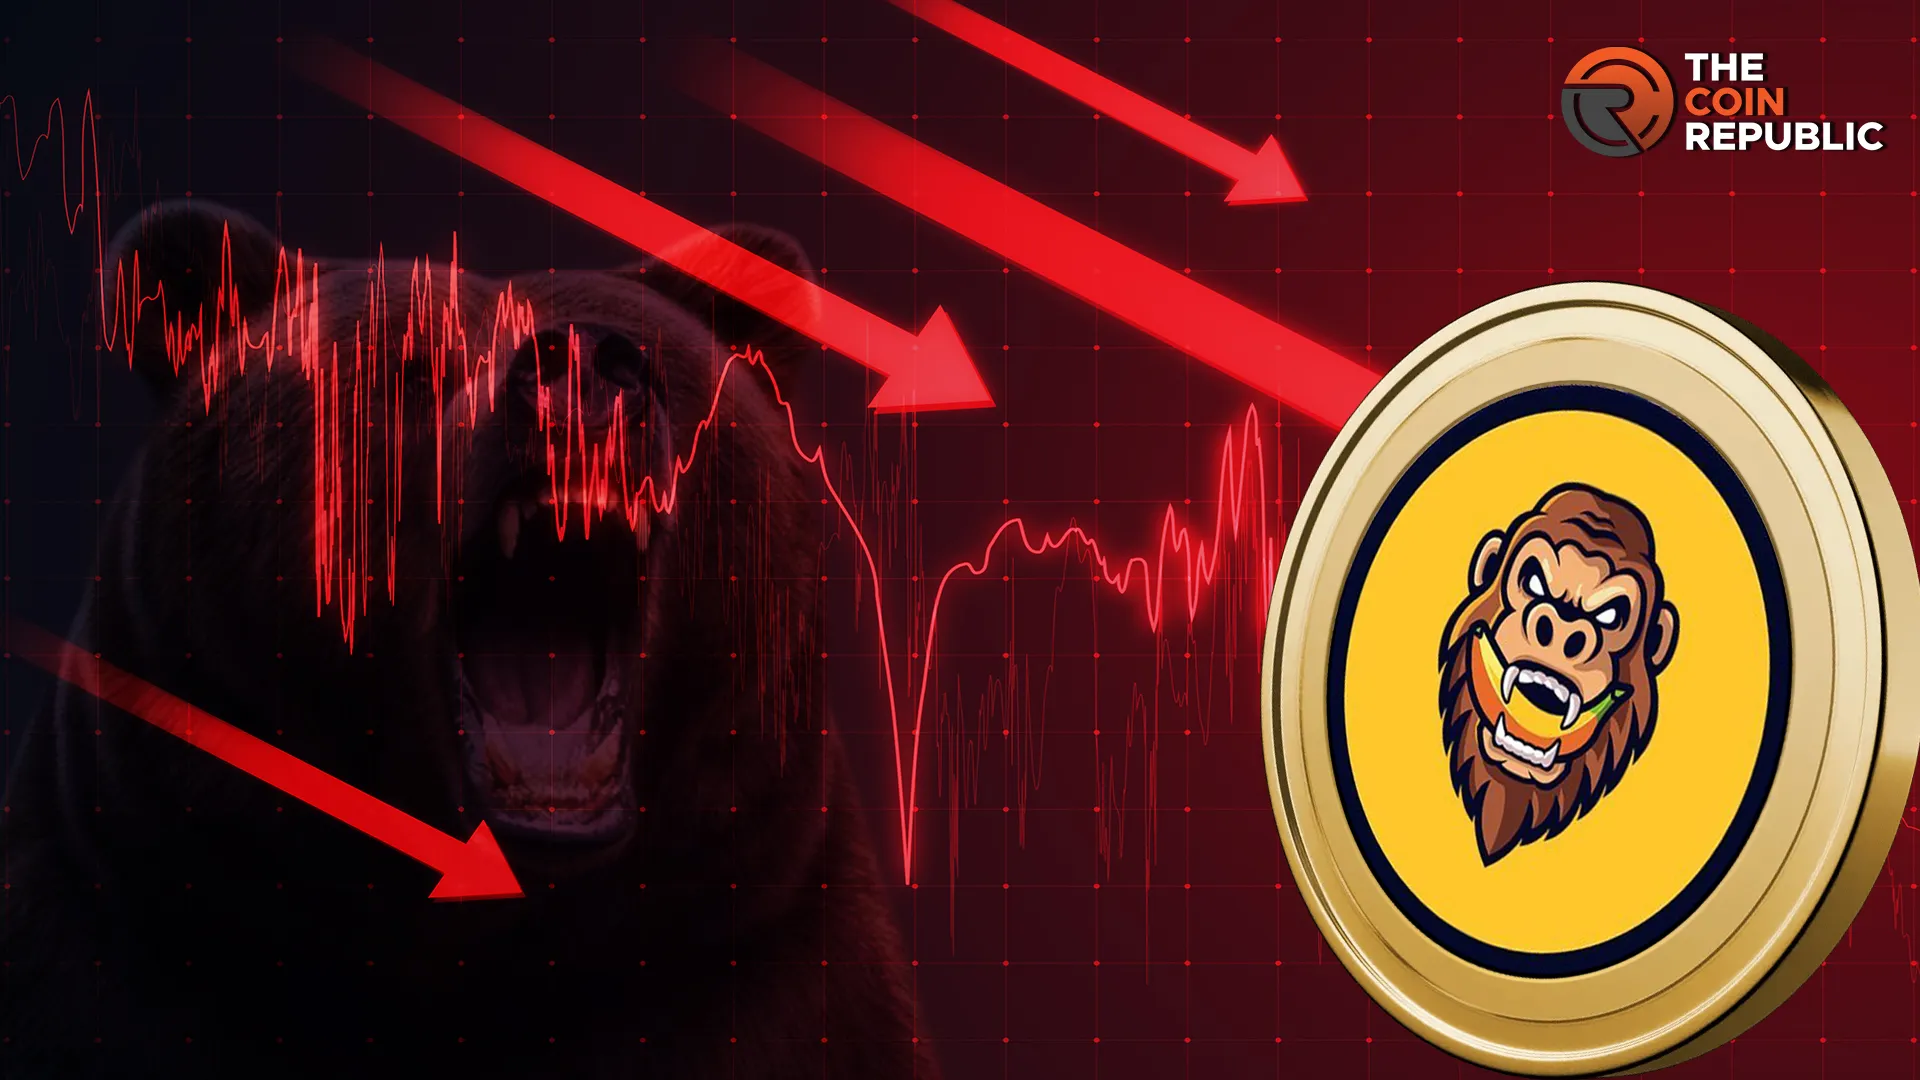 Gorilla Cryptocurrency Tumbles: Bearish Signals Signal Potential for Deeper Decline